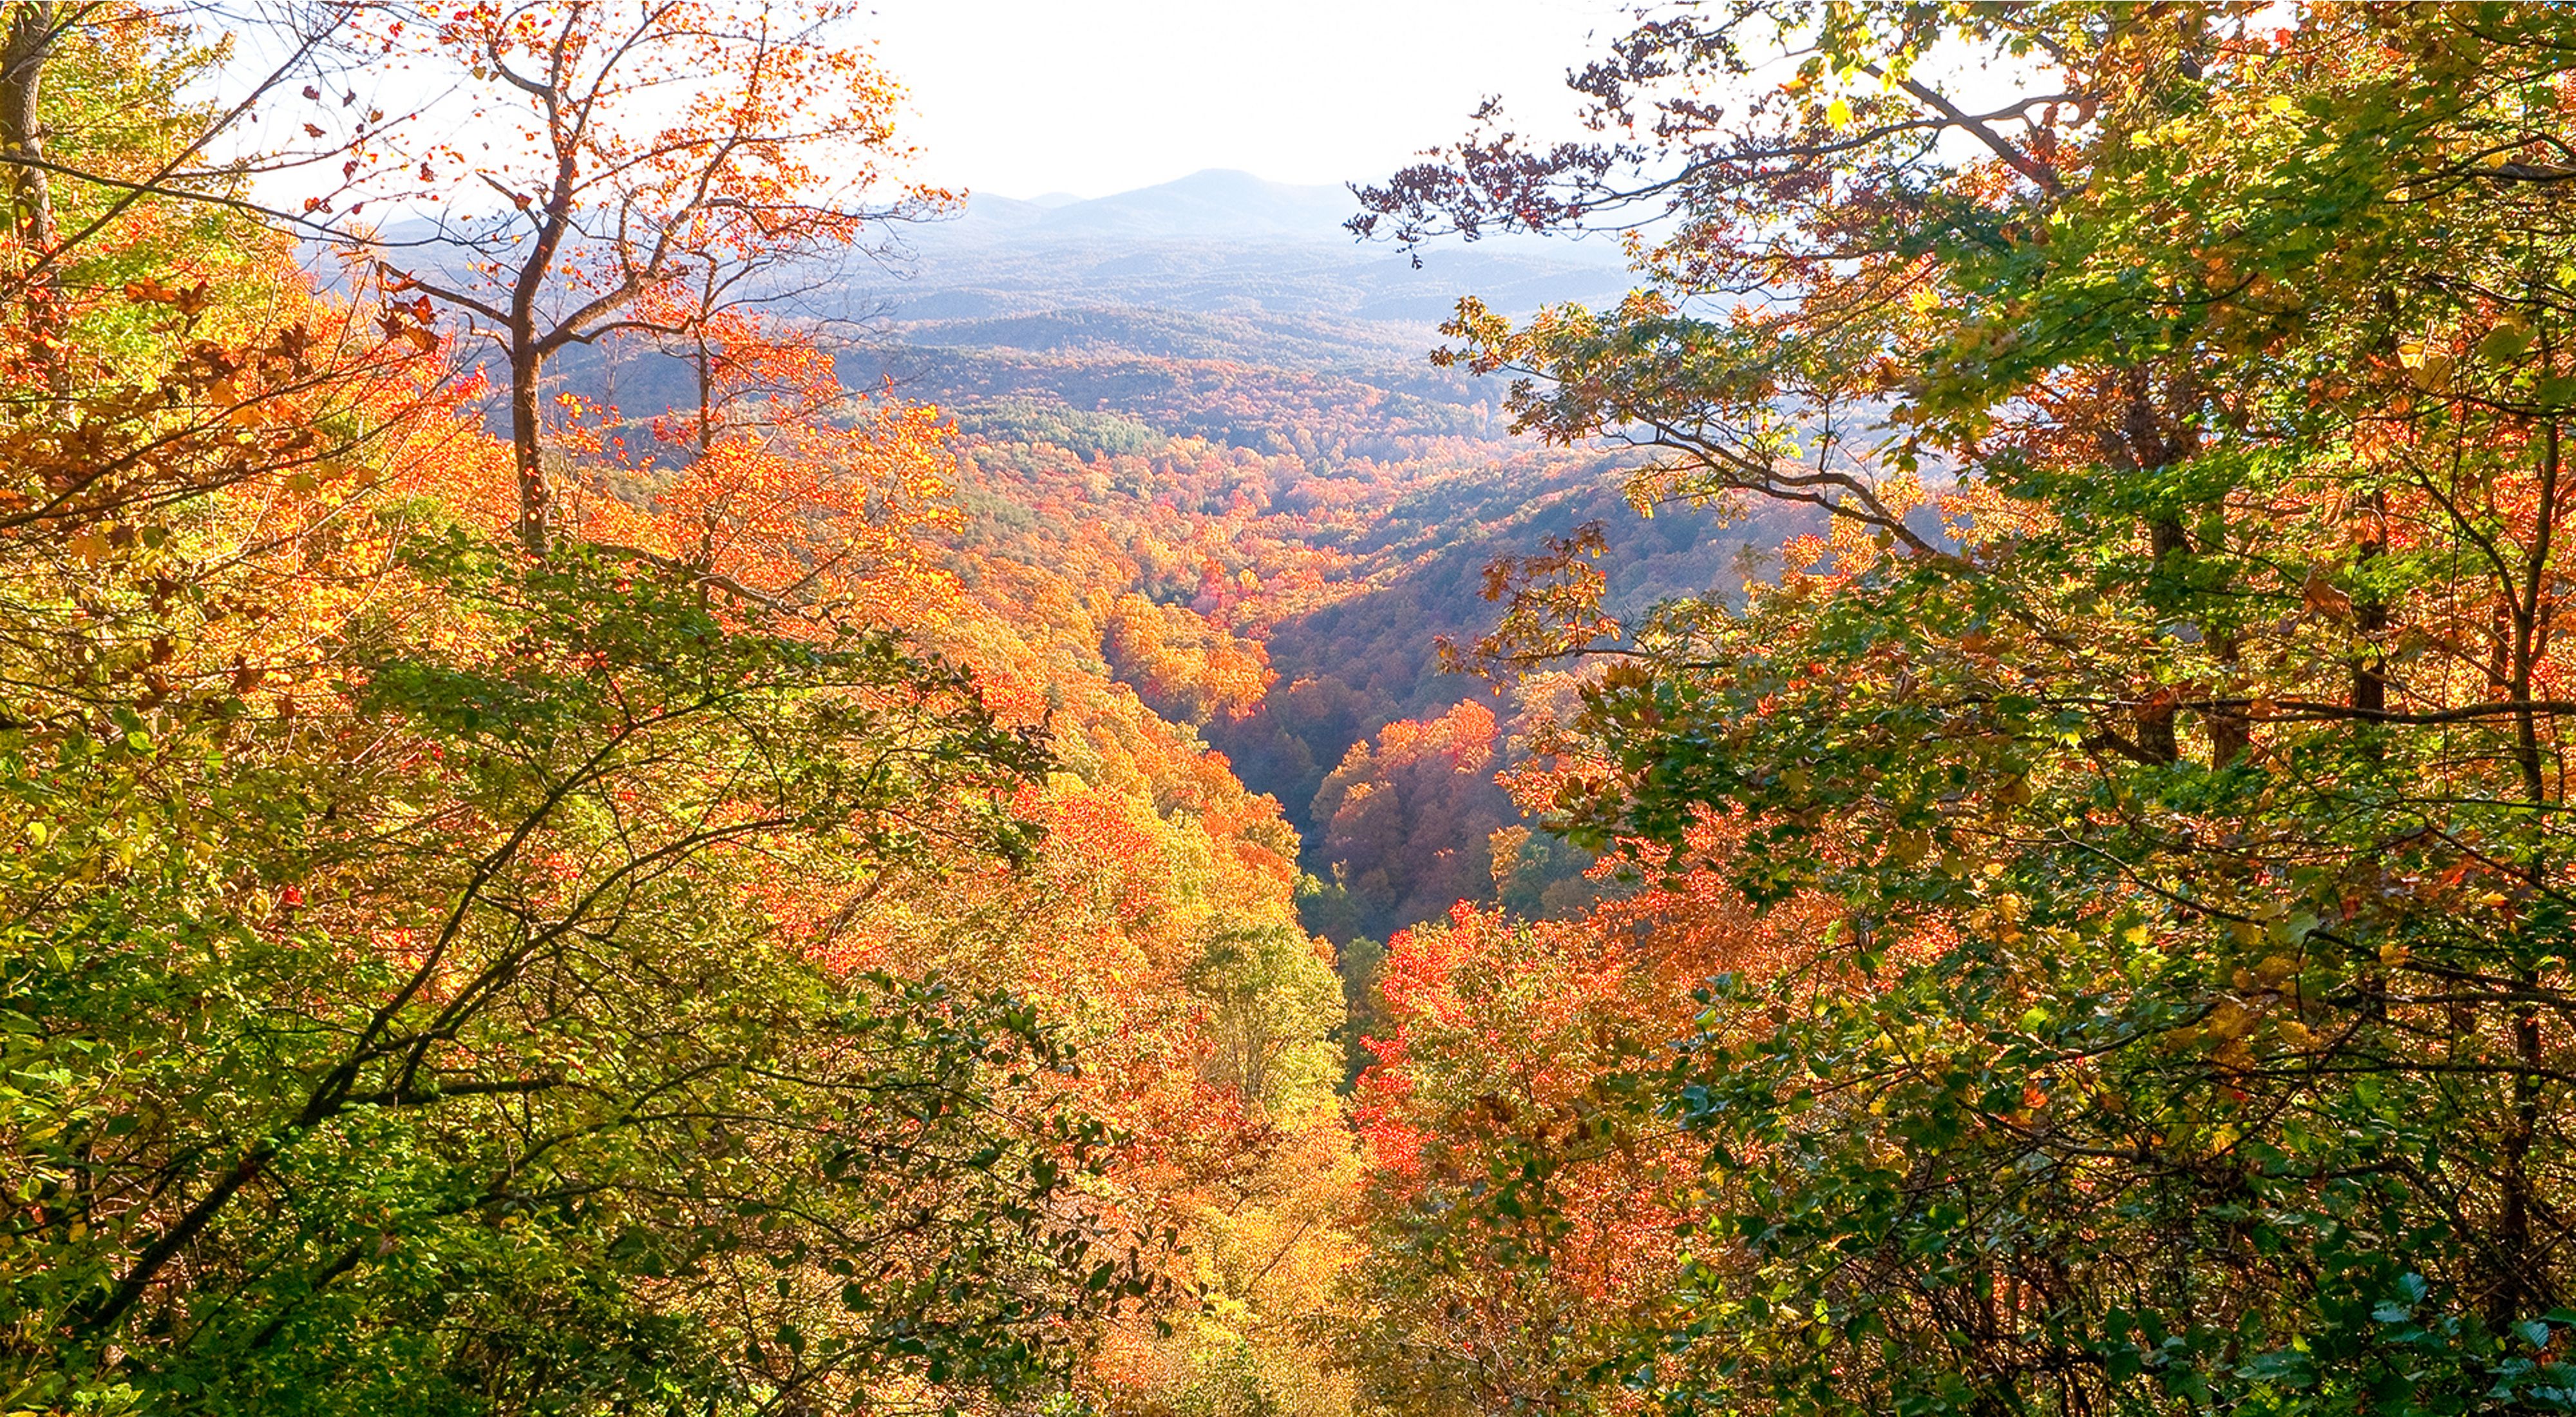 A view down to the valley below Amicalola Falls, with the leaves on the trees in all the hues of autumn.